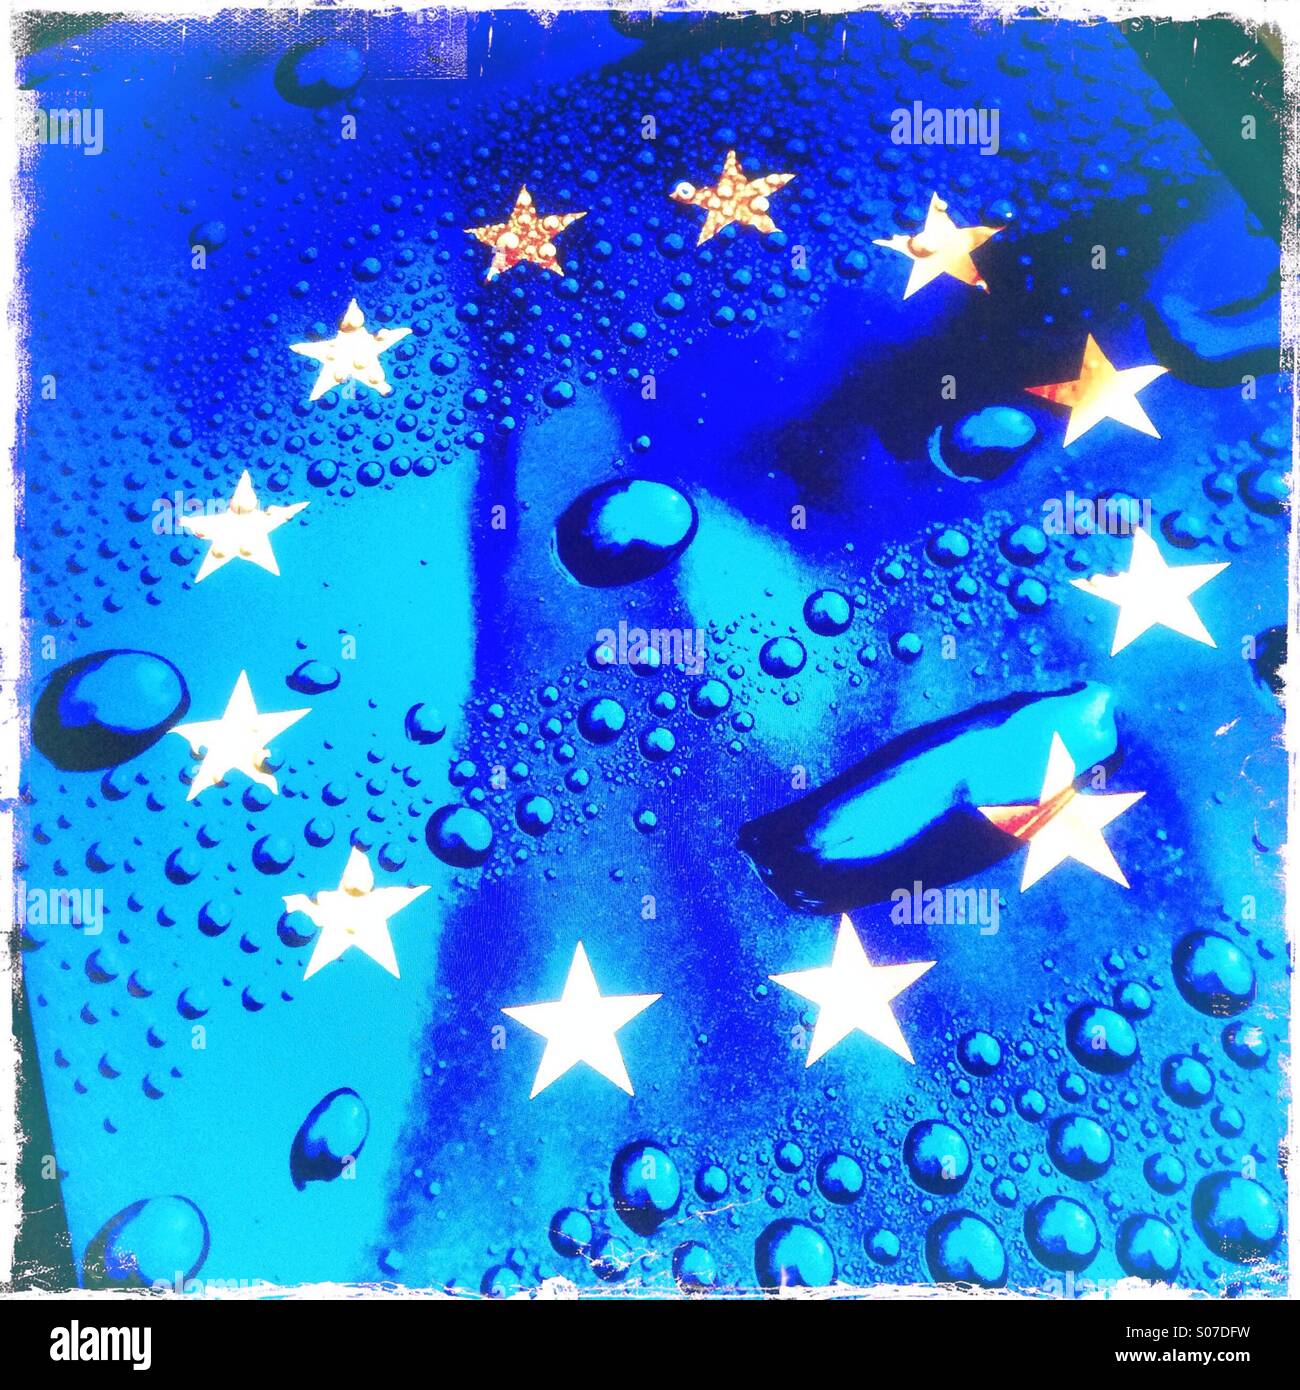 Water droplets over the flag of the European Union Stock Photo